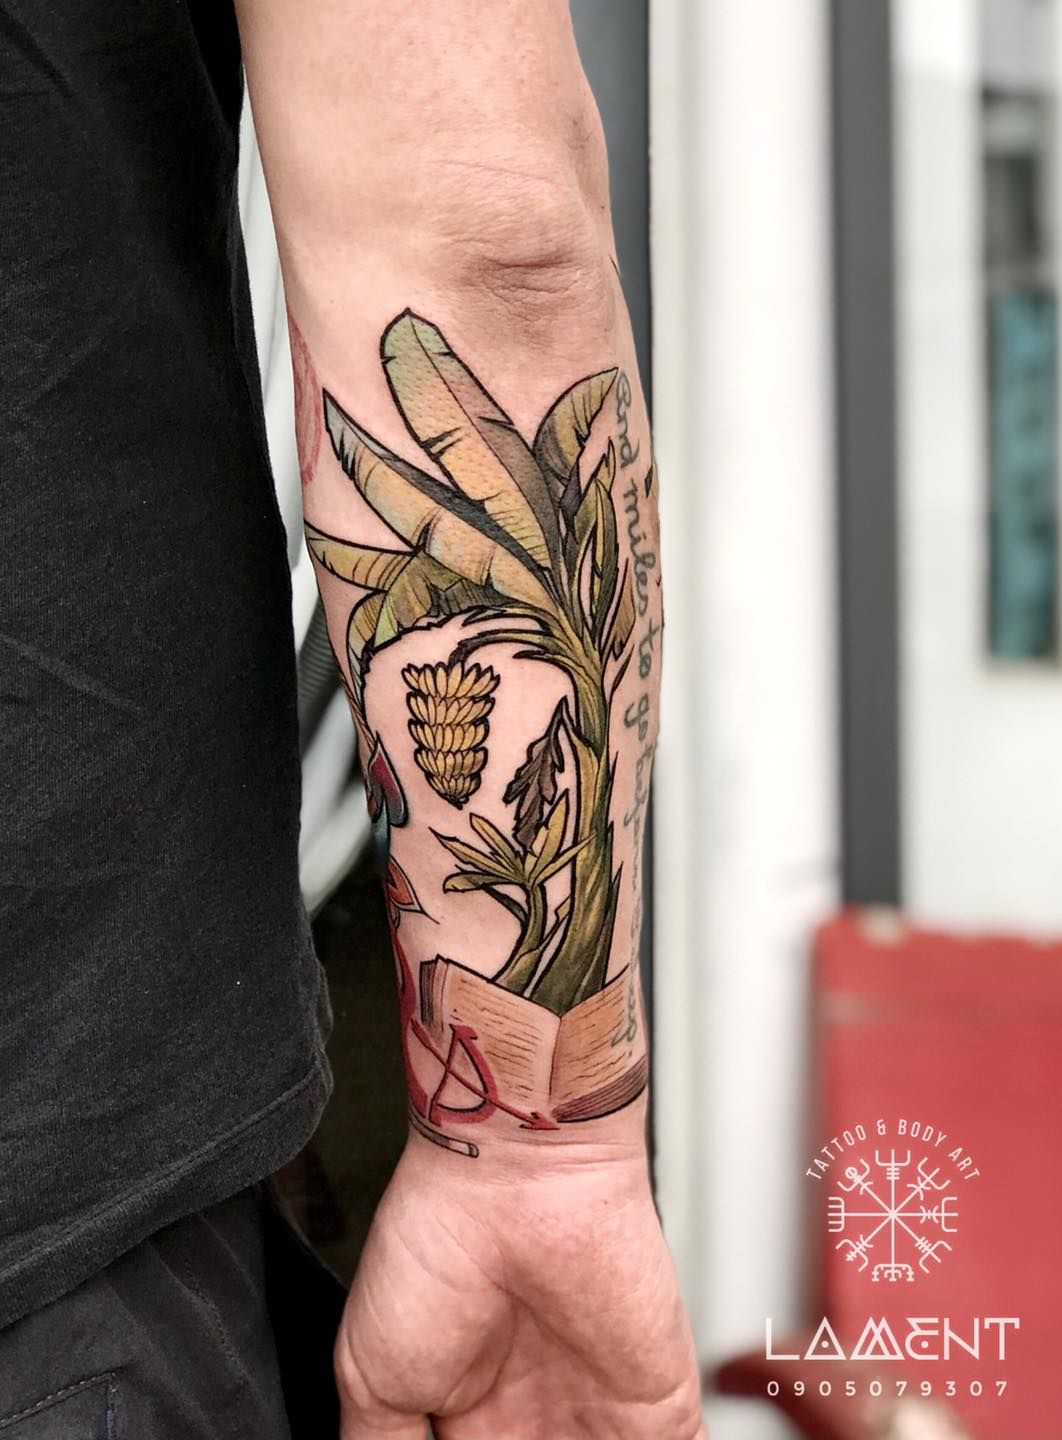 secret on Instagram i had the absolute pleasure of getting to tattoo  claudia a second time with a banana leaf to represent her time in  guatemala  tysm